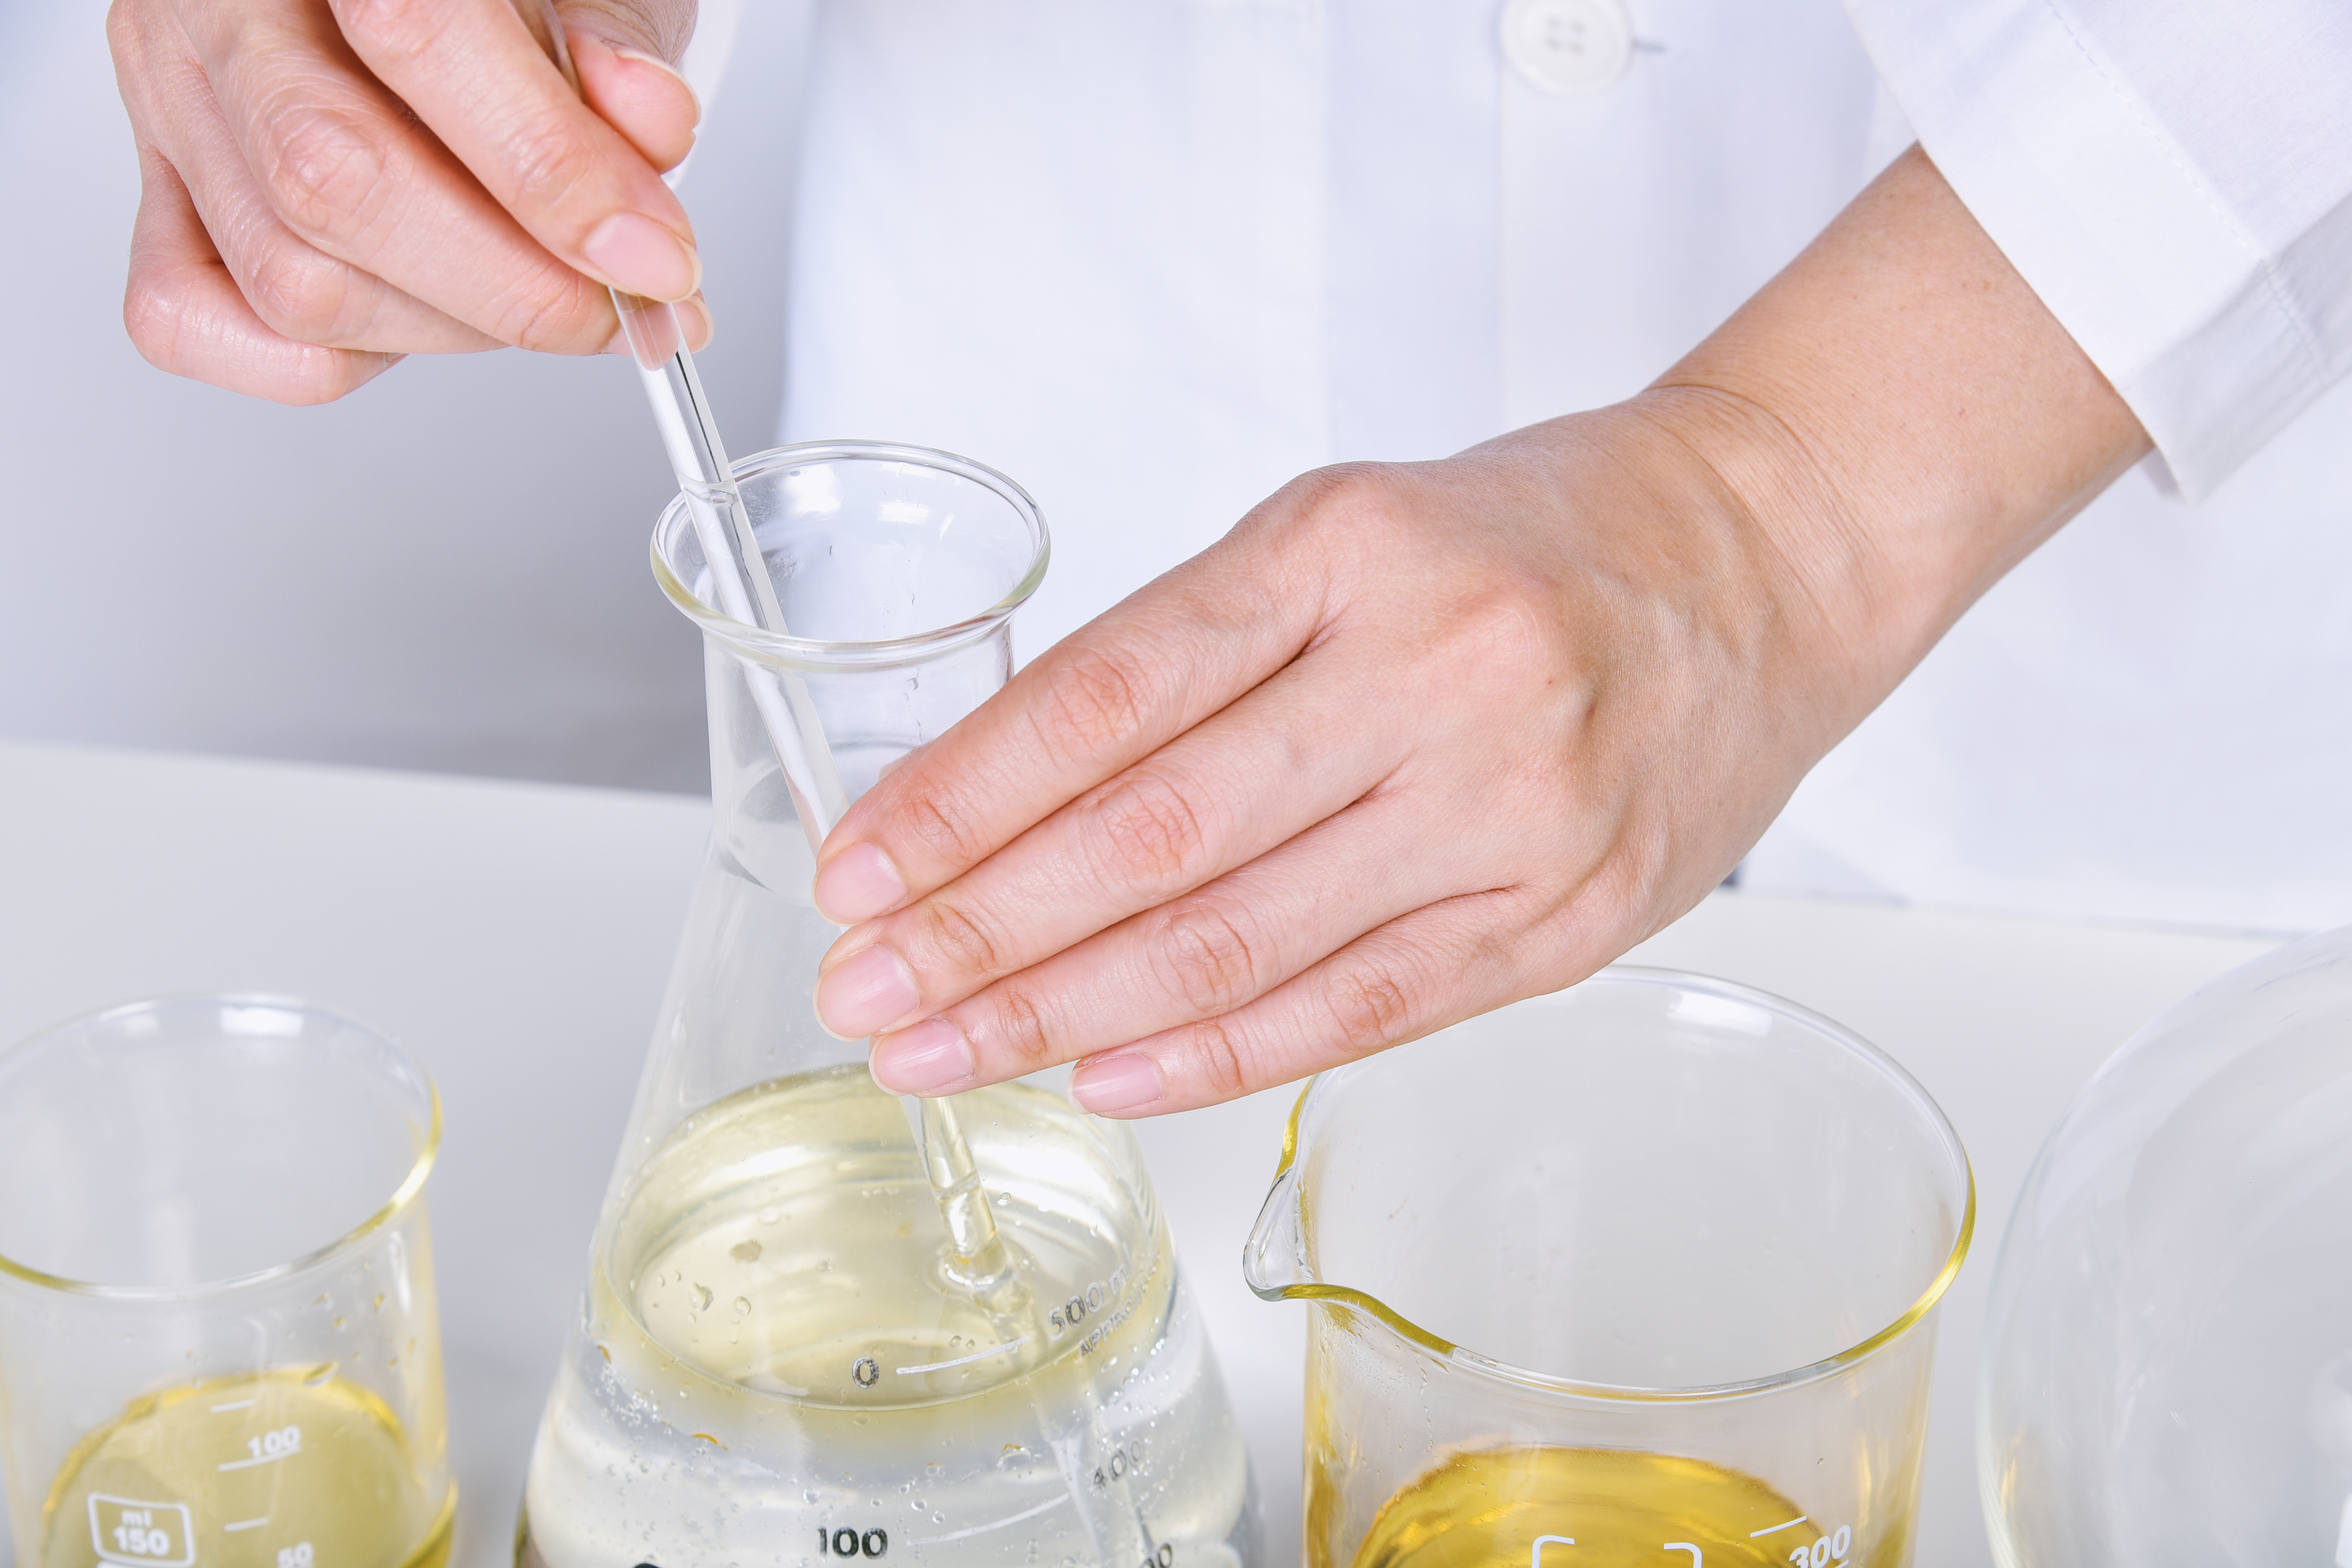 Chemical reagent pouring and mixing, Laboratory and science experiments, Formulating the chemical for medical research.